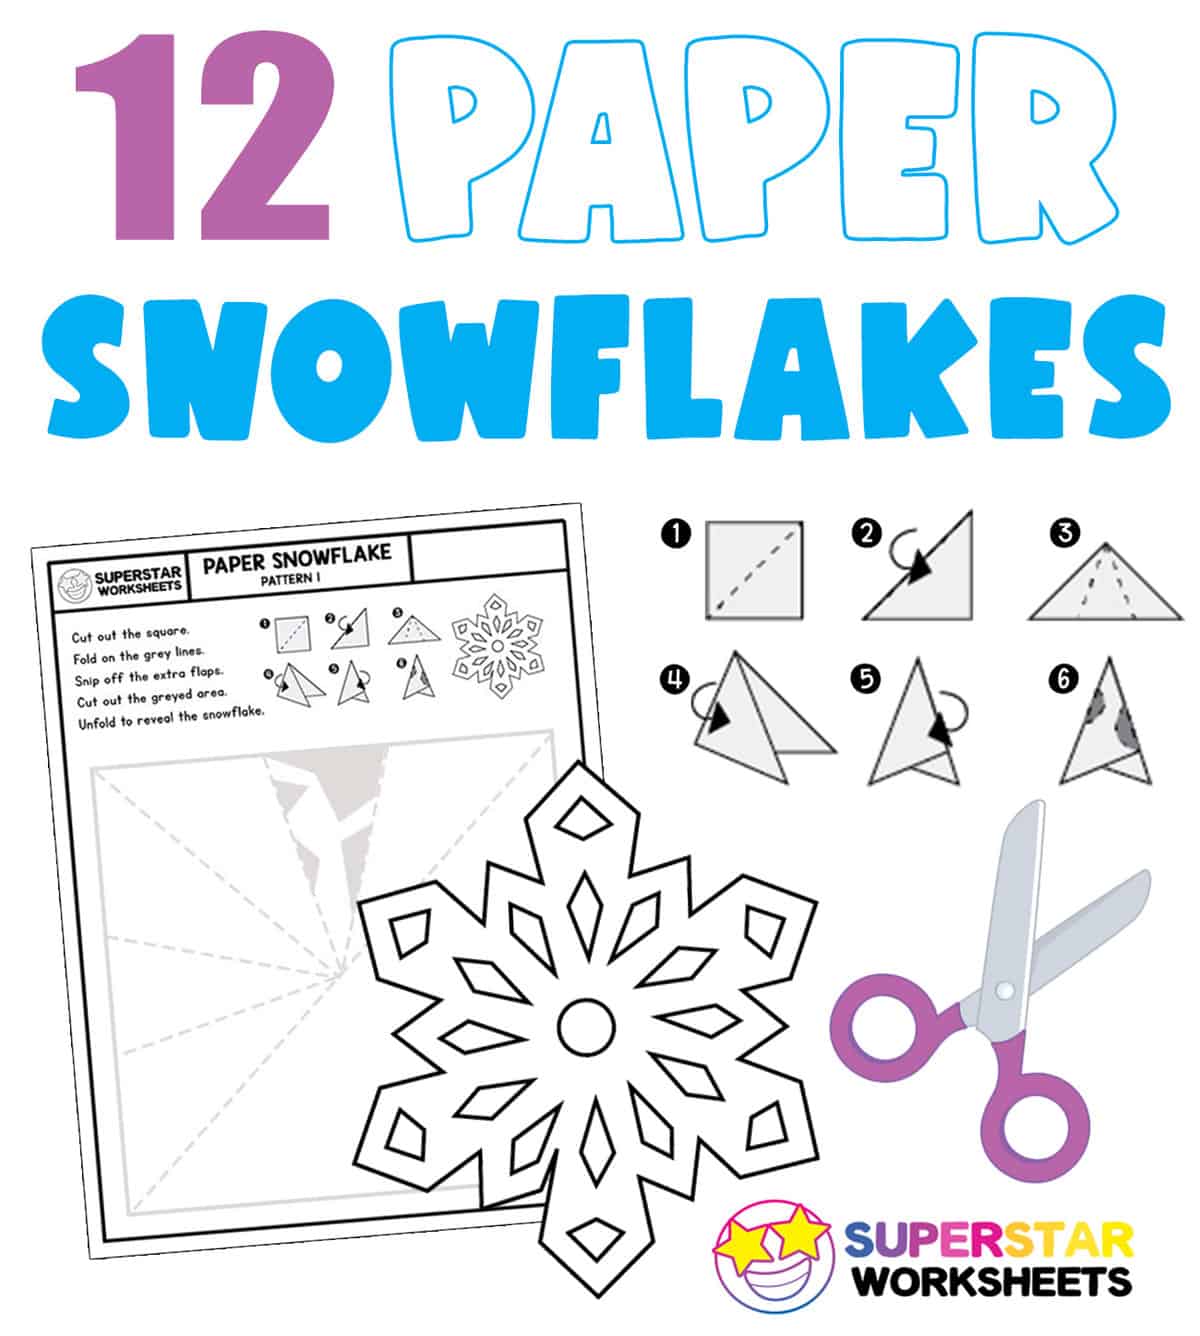 Paper Snowflakes for Preschoolers - Reading adventures for kids ages 3 to 5